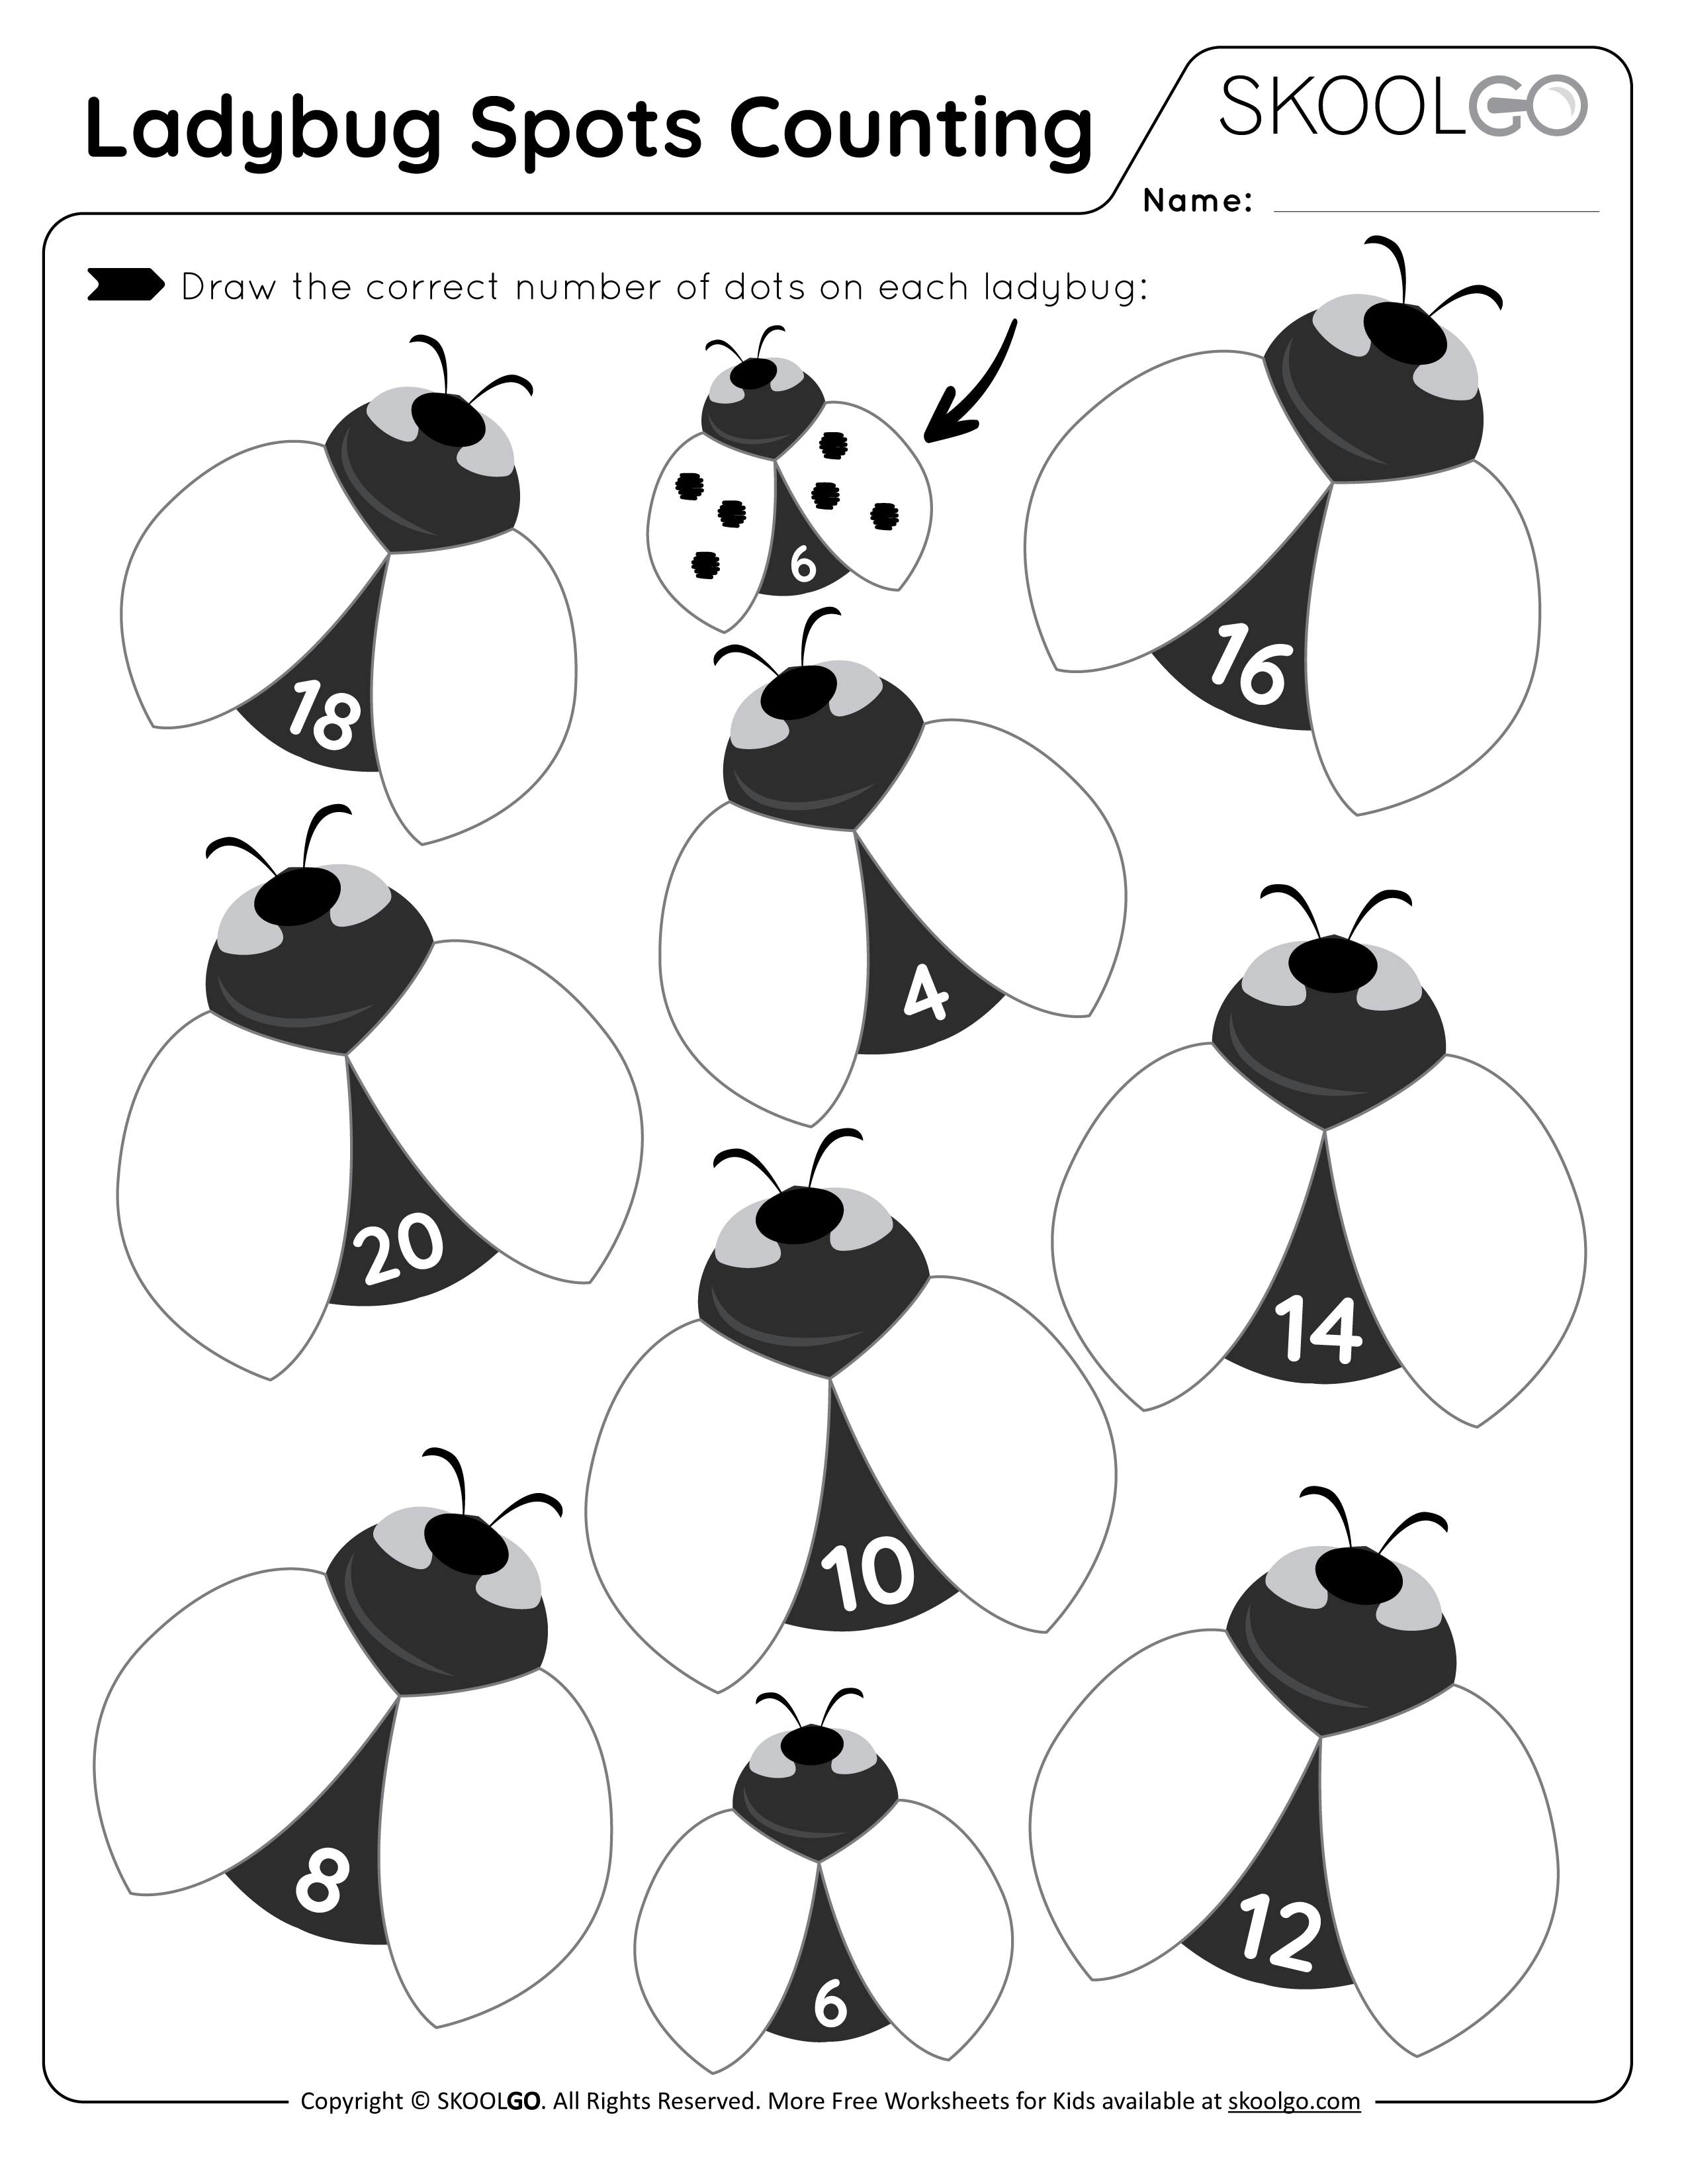 Ladybug Spots Counting - Free Worksheet for Kids - Black and White